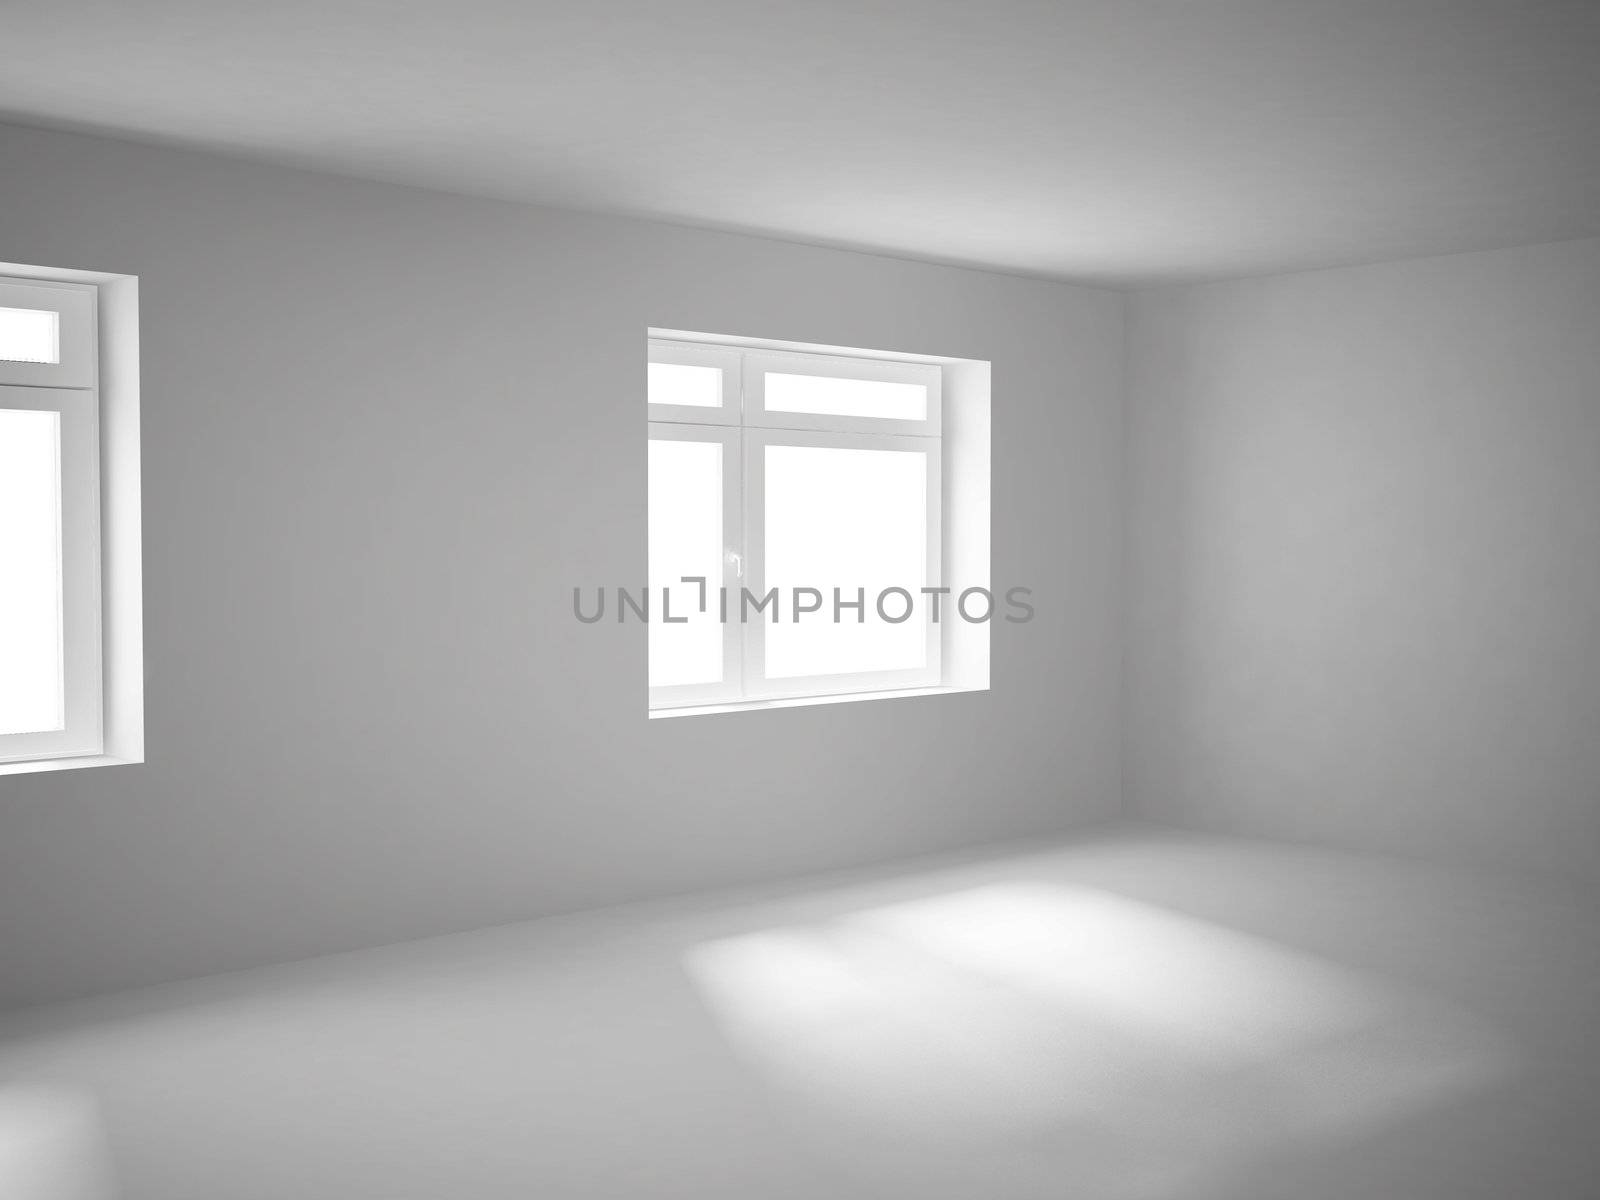 High resolution image interior. 3d illustration. The white, shined room.